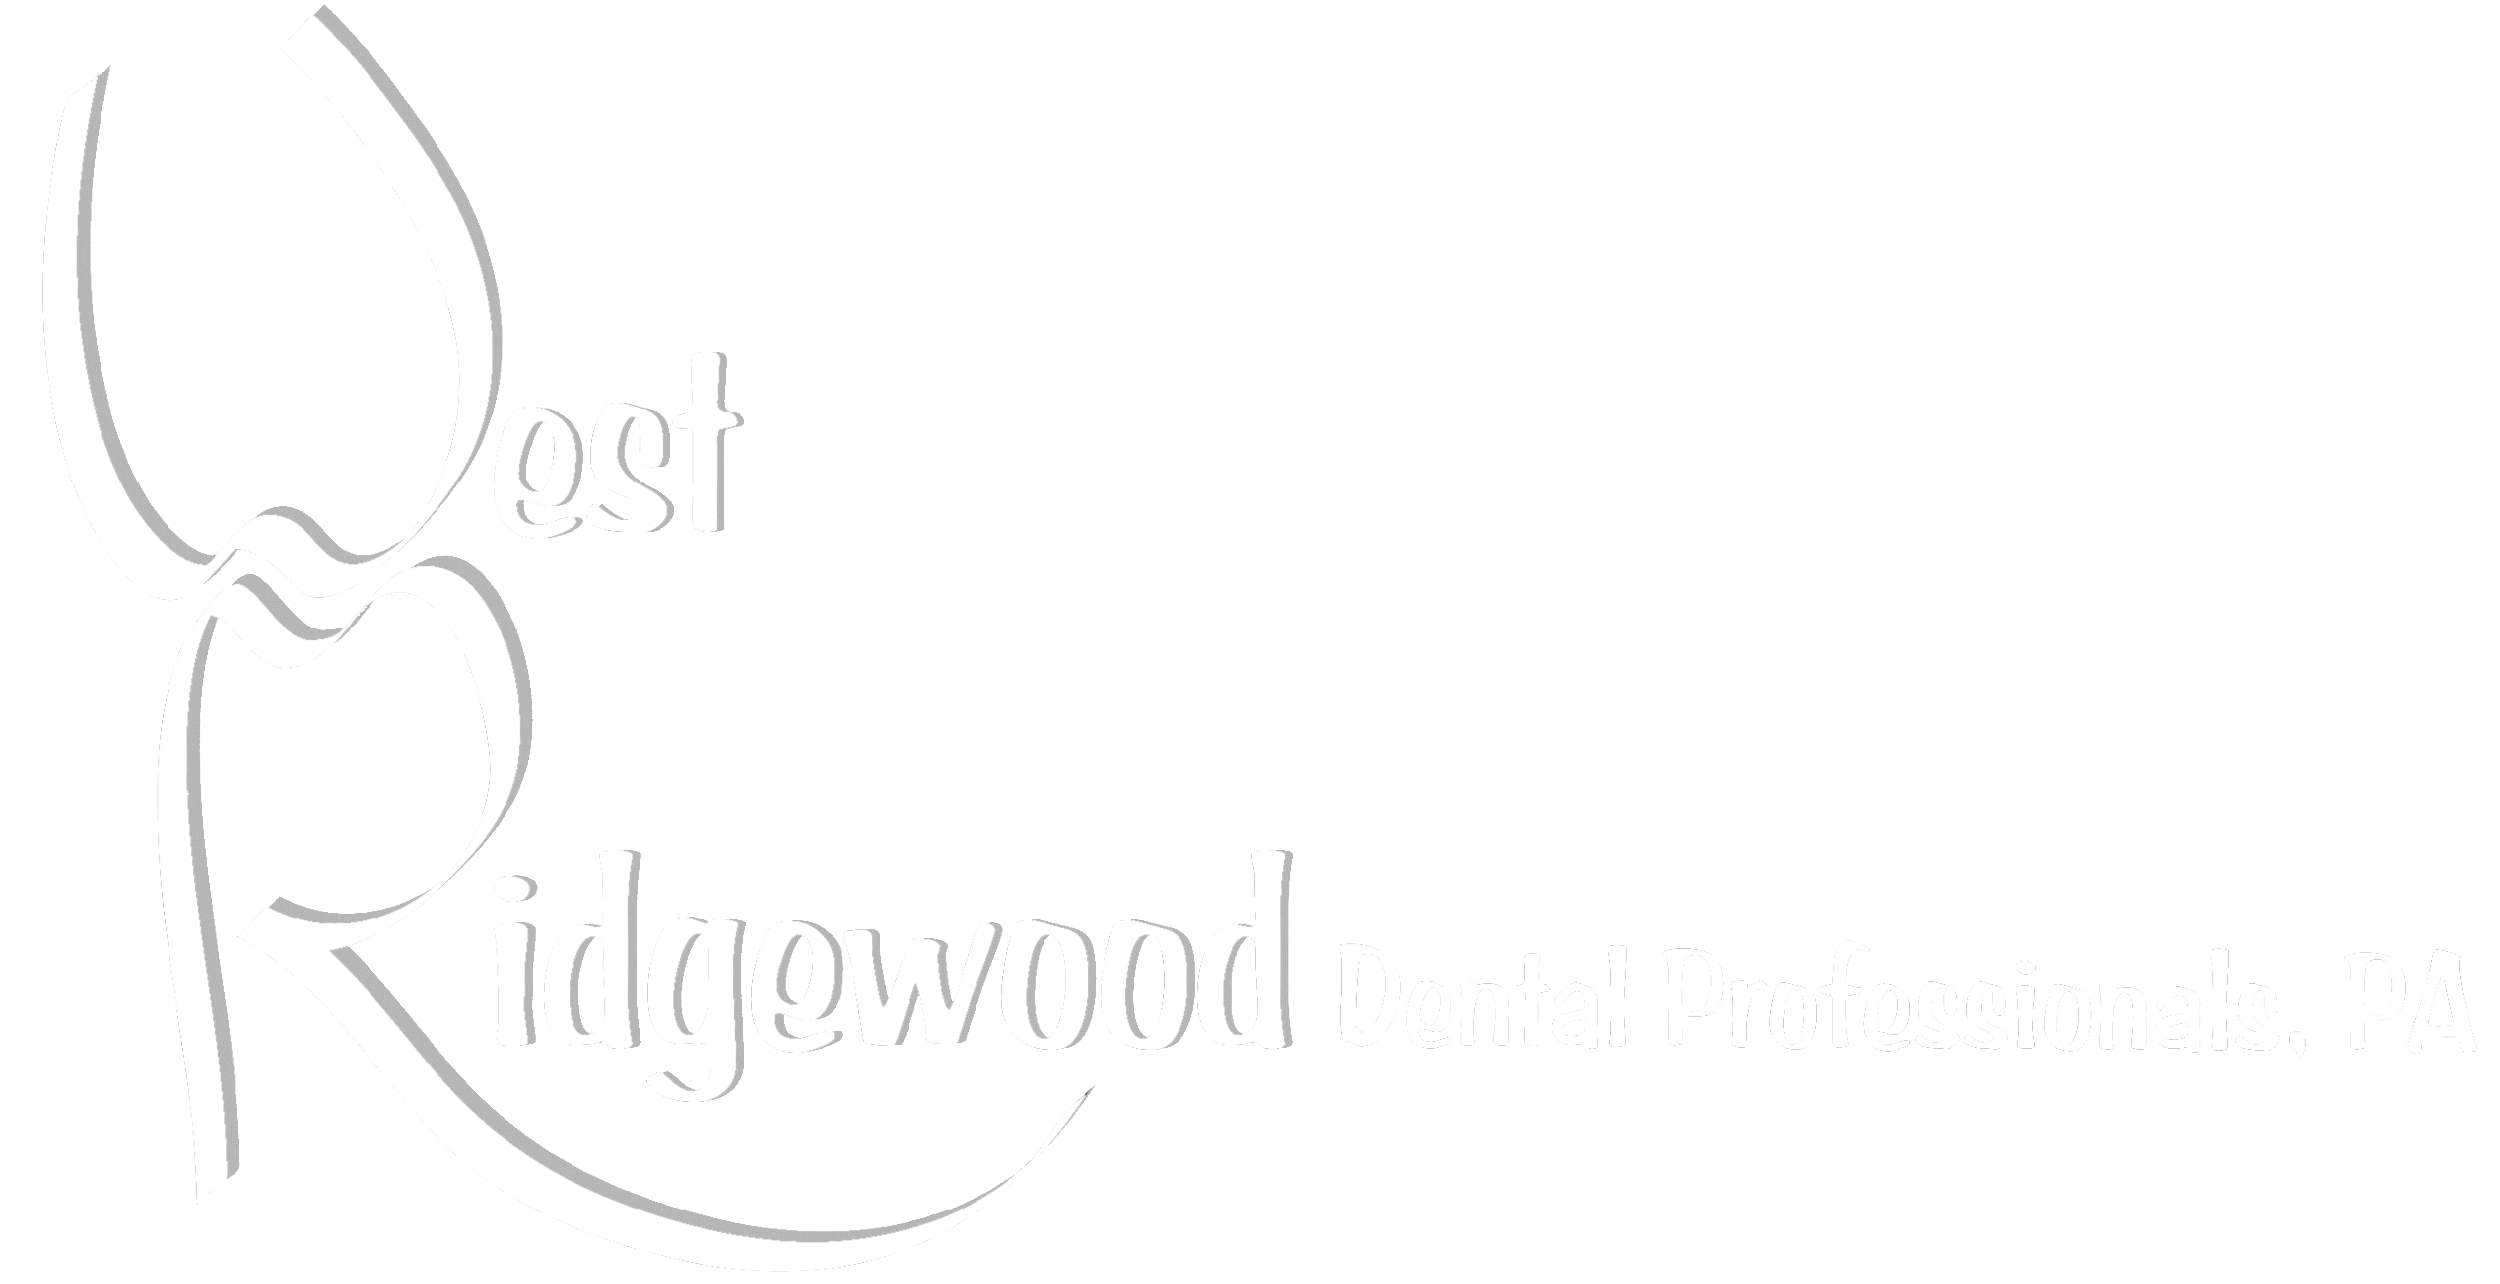 West Ridgewood Dental Professionals, PA | Top Dentists Near Me in NJ - Bergen County Dentists for Kids, Adults, and Teen